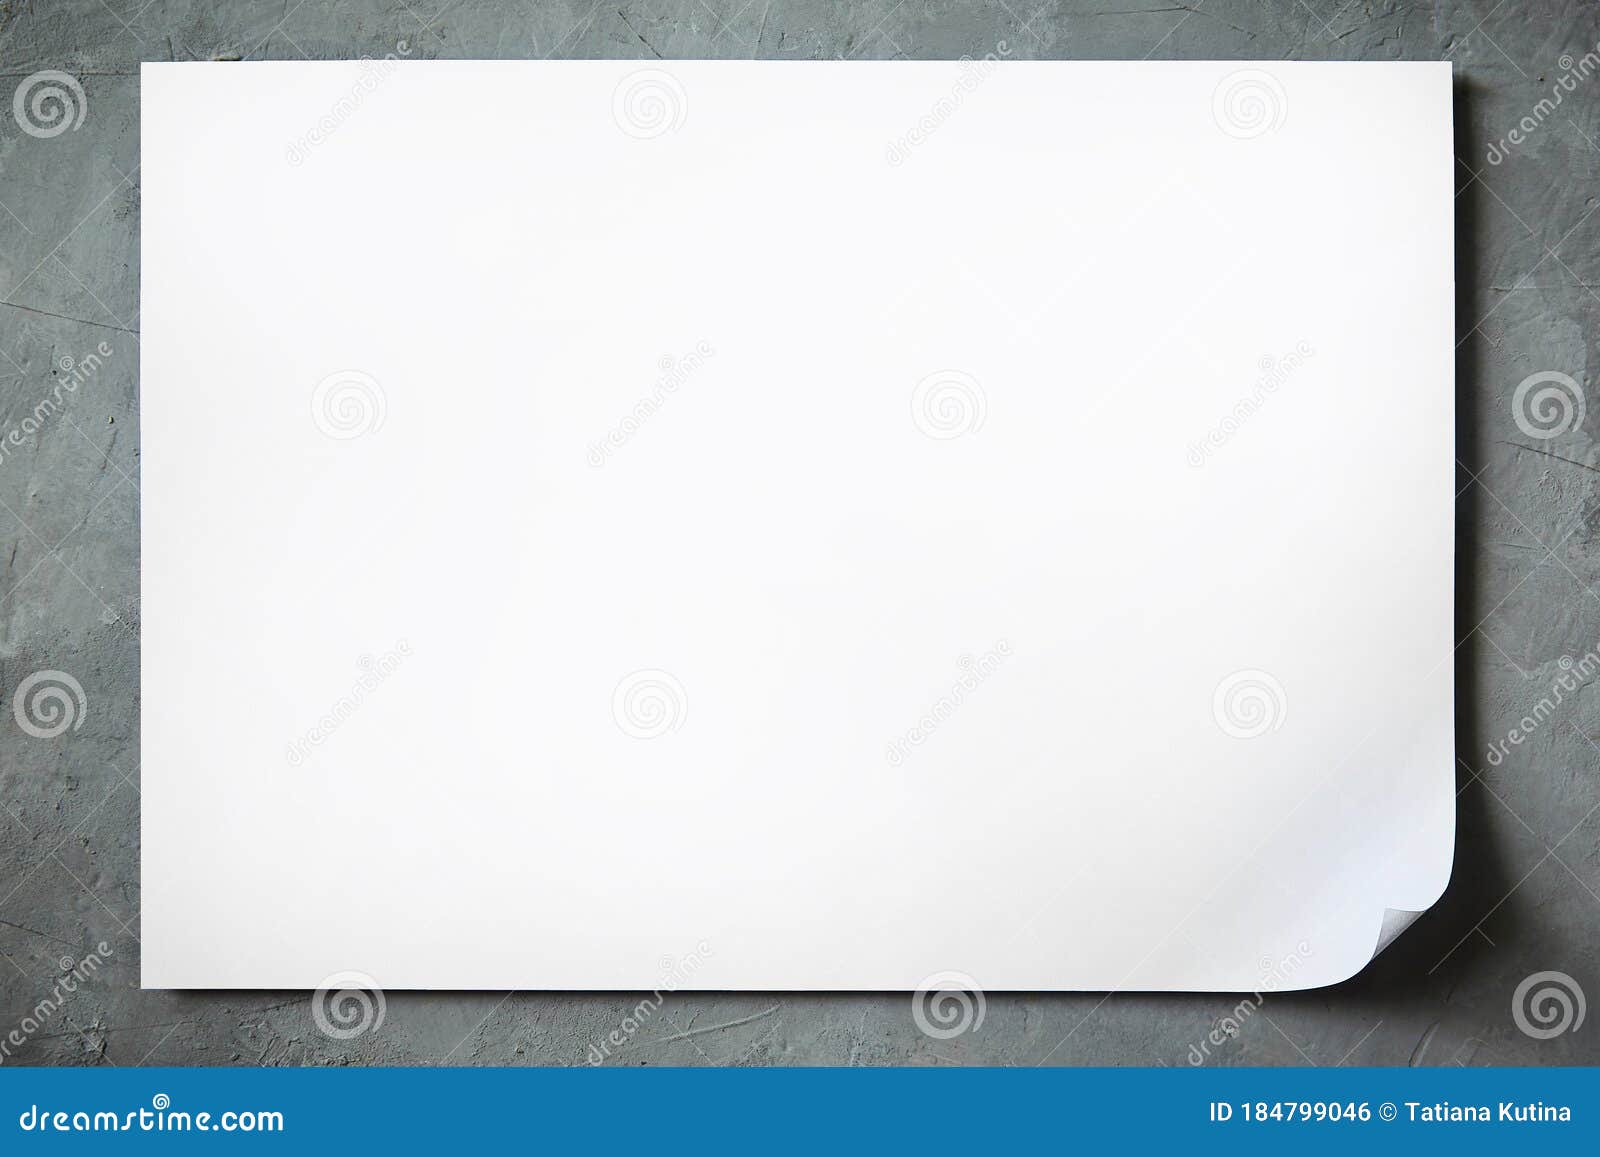 mock up of a sheet of white a4 paper with a bent corner and shadow on a concrete background